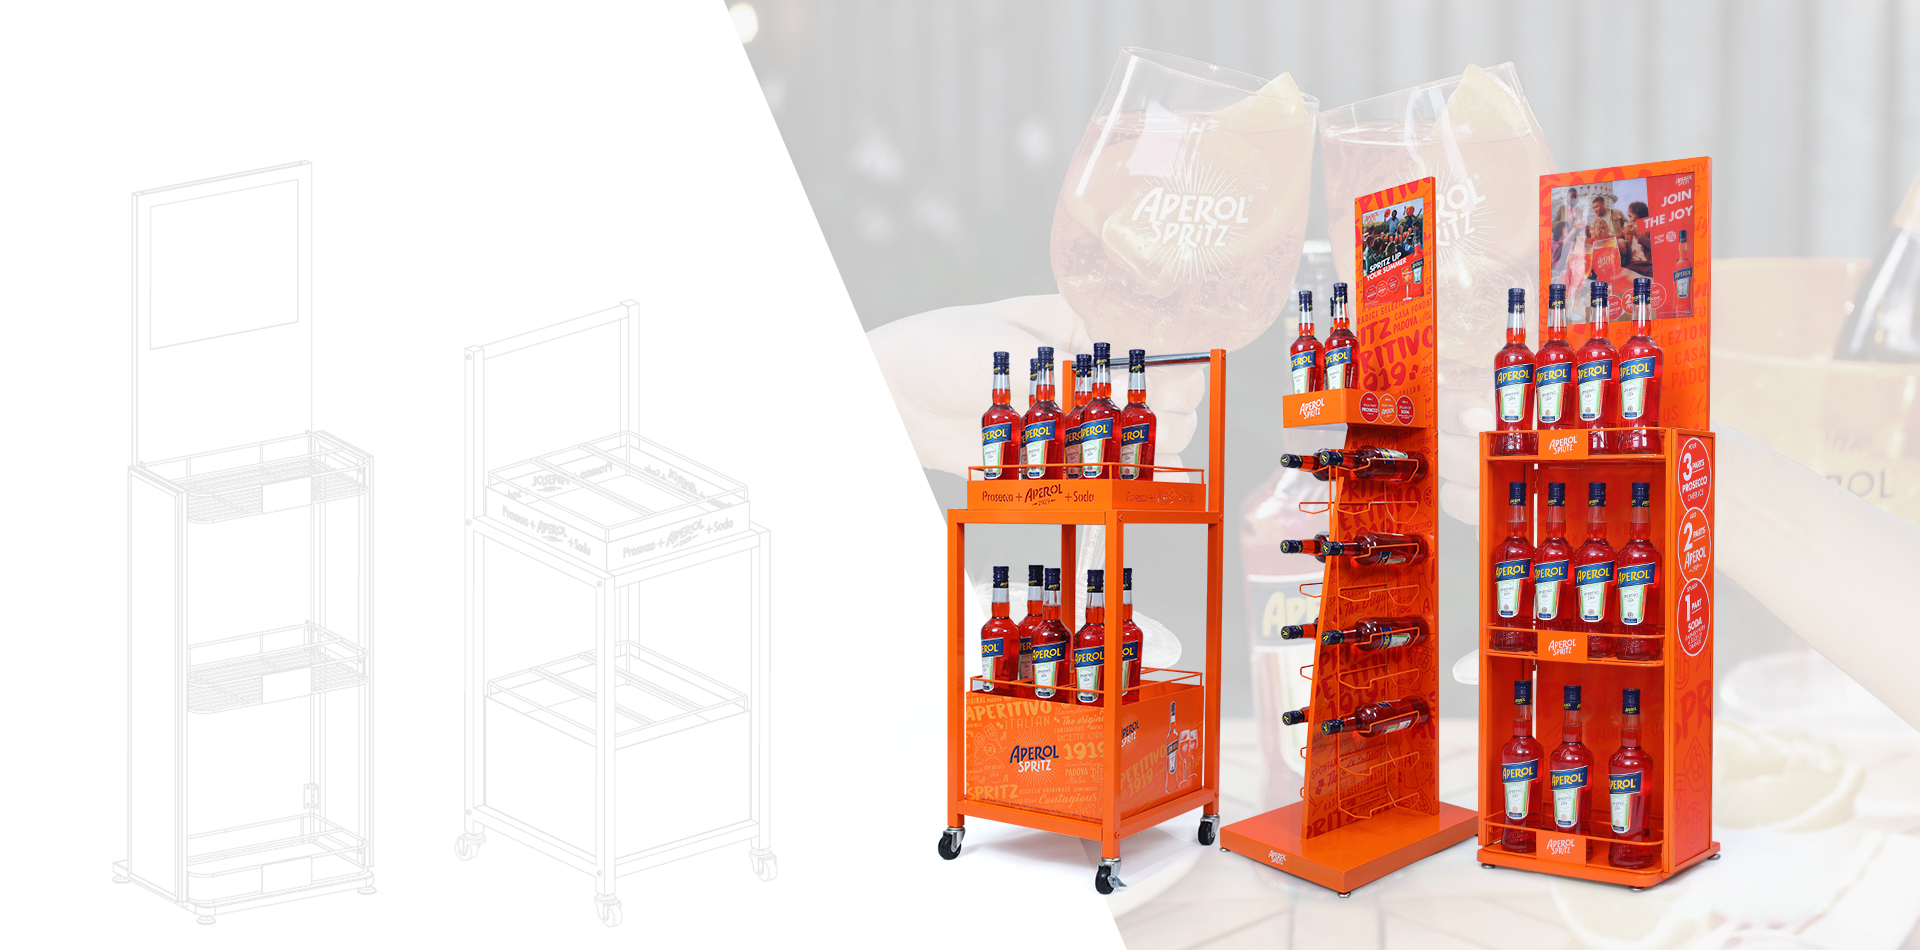 PRODUCT DISPLAY STANDS SUPPLIERS SINCE 2008